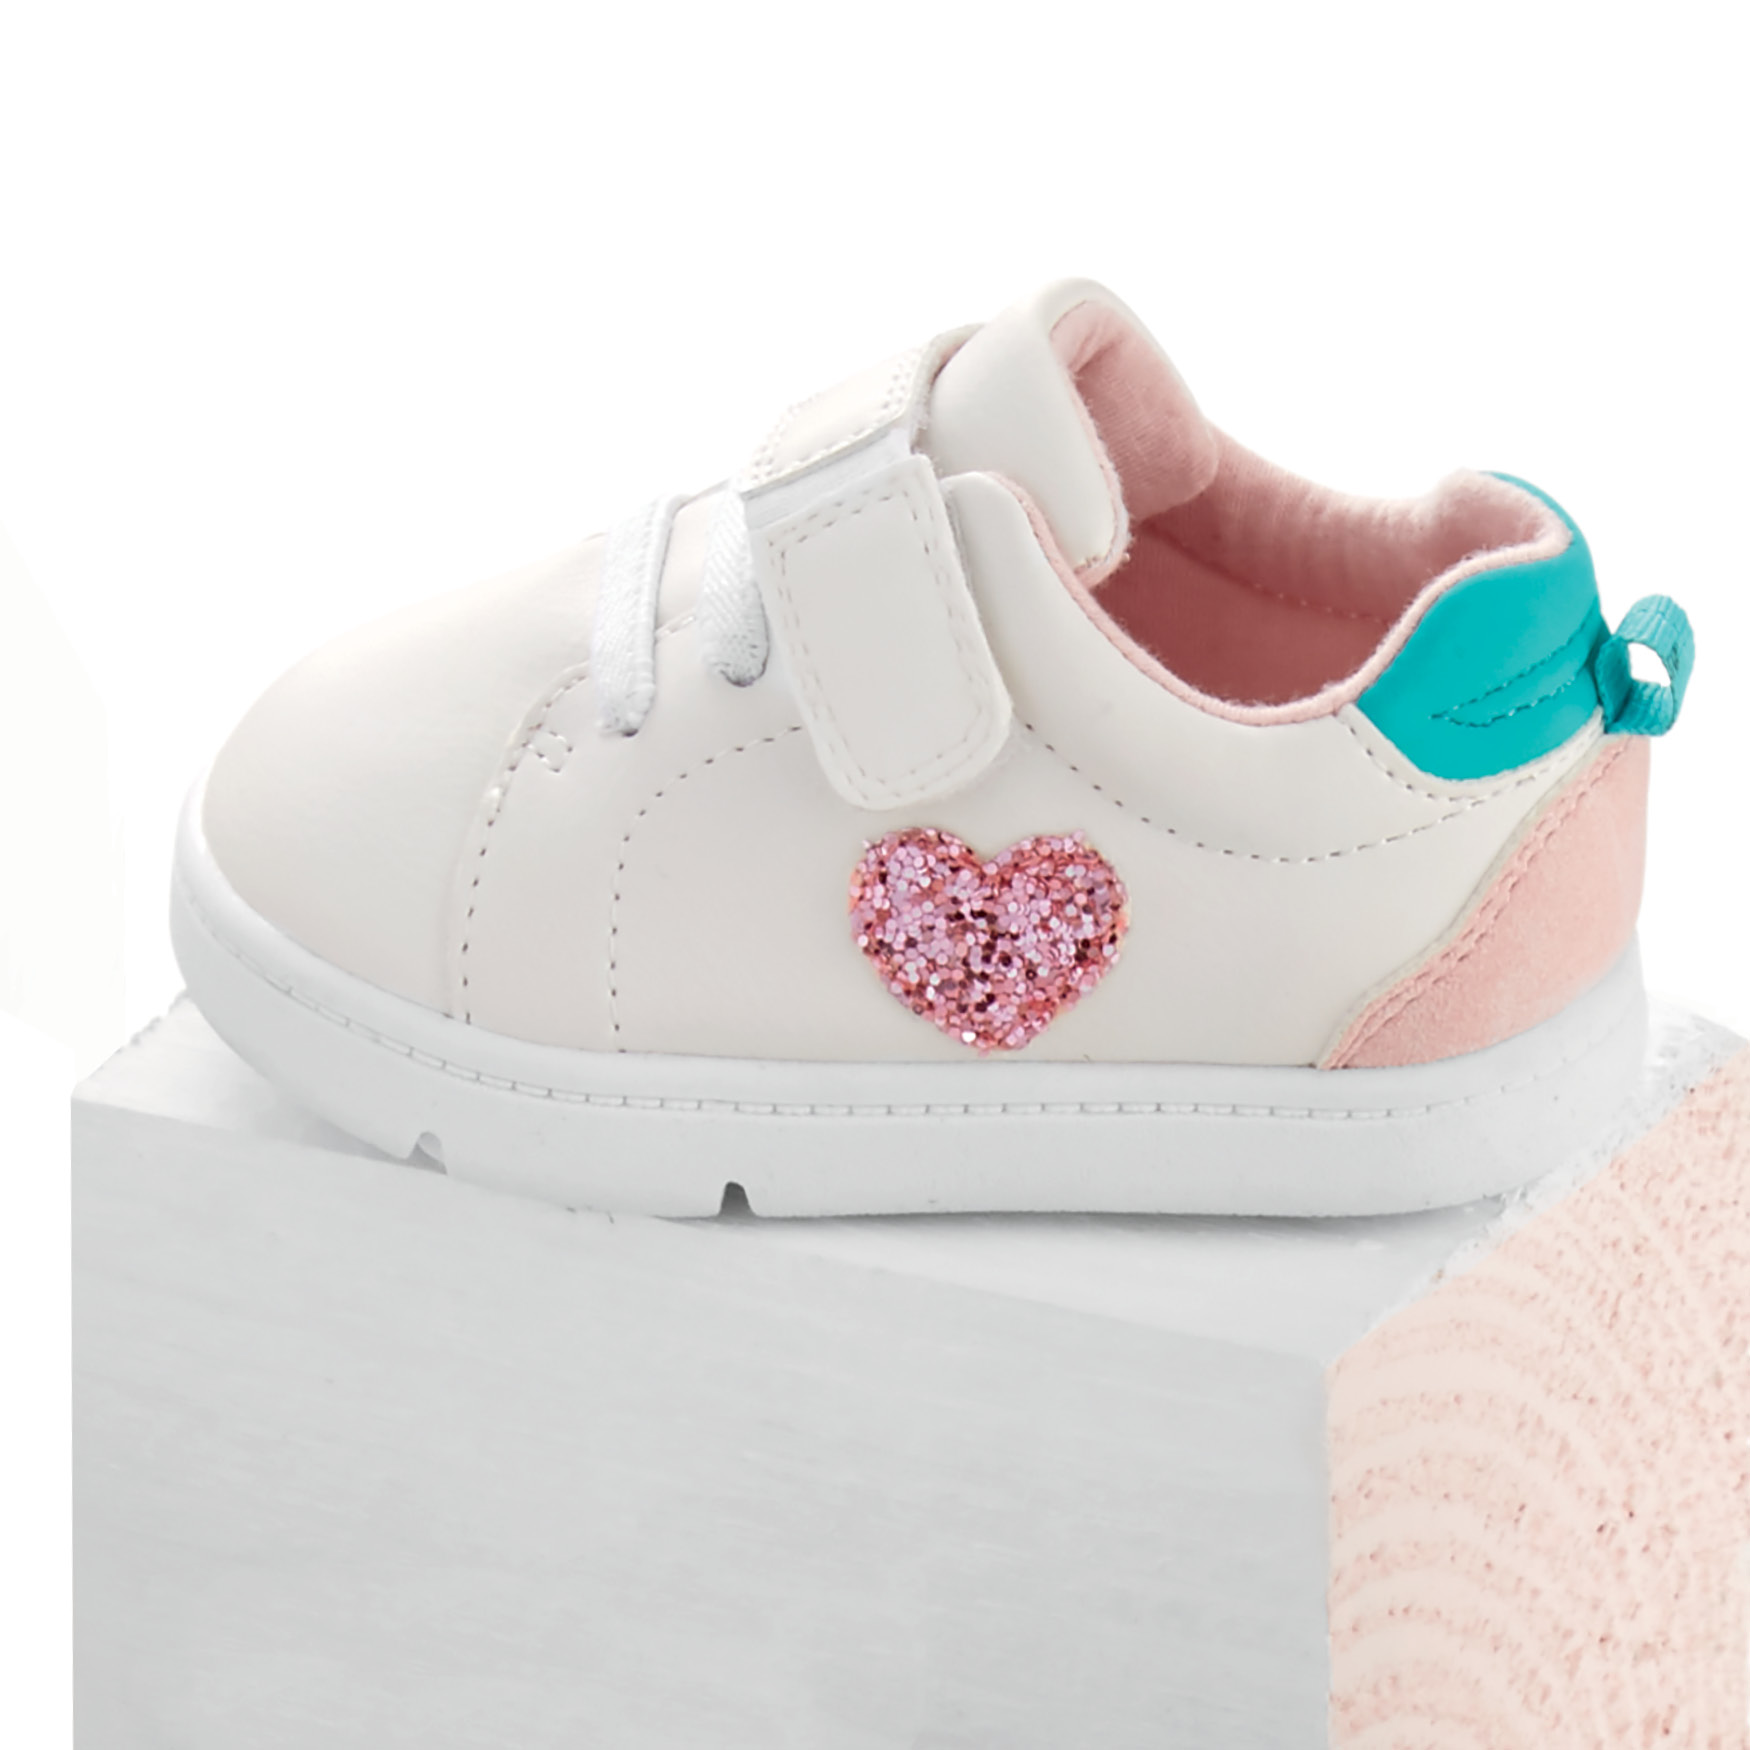 are walking shoes good for babies